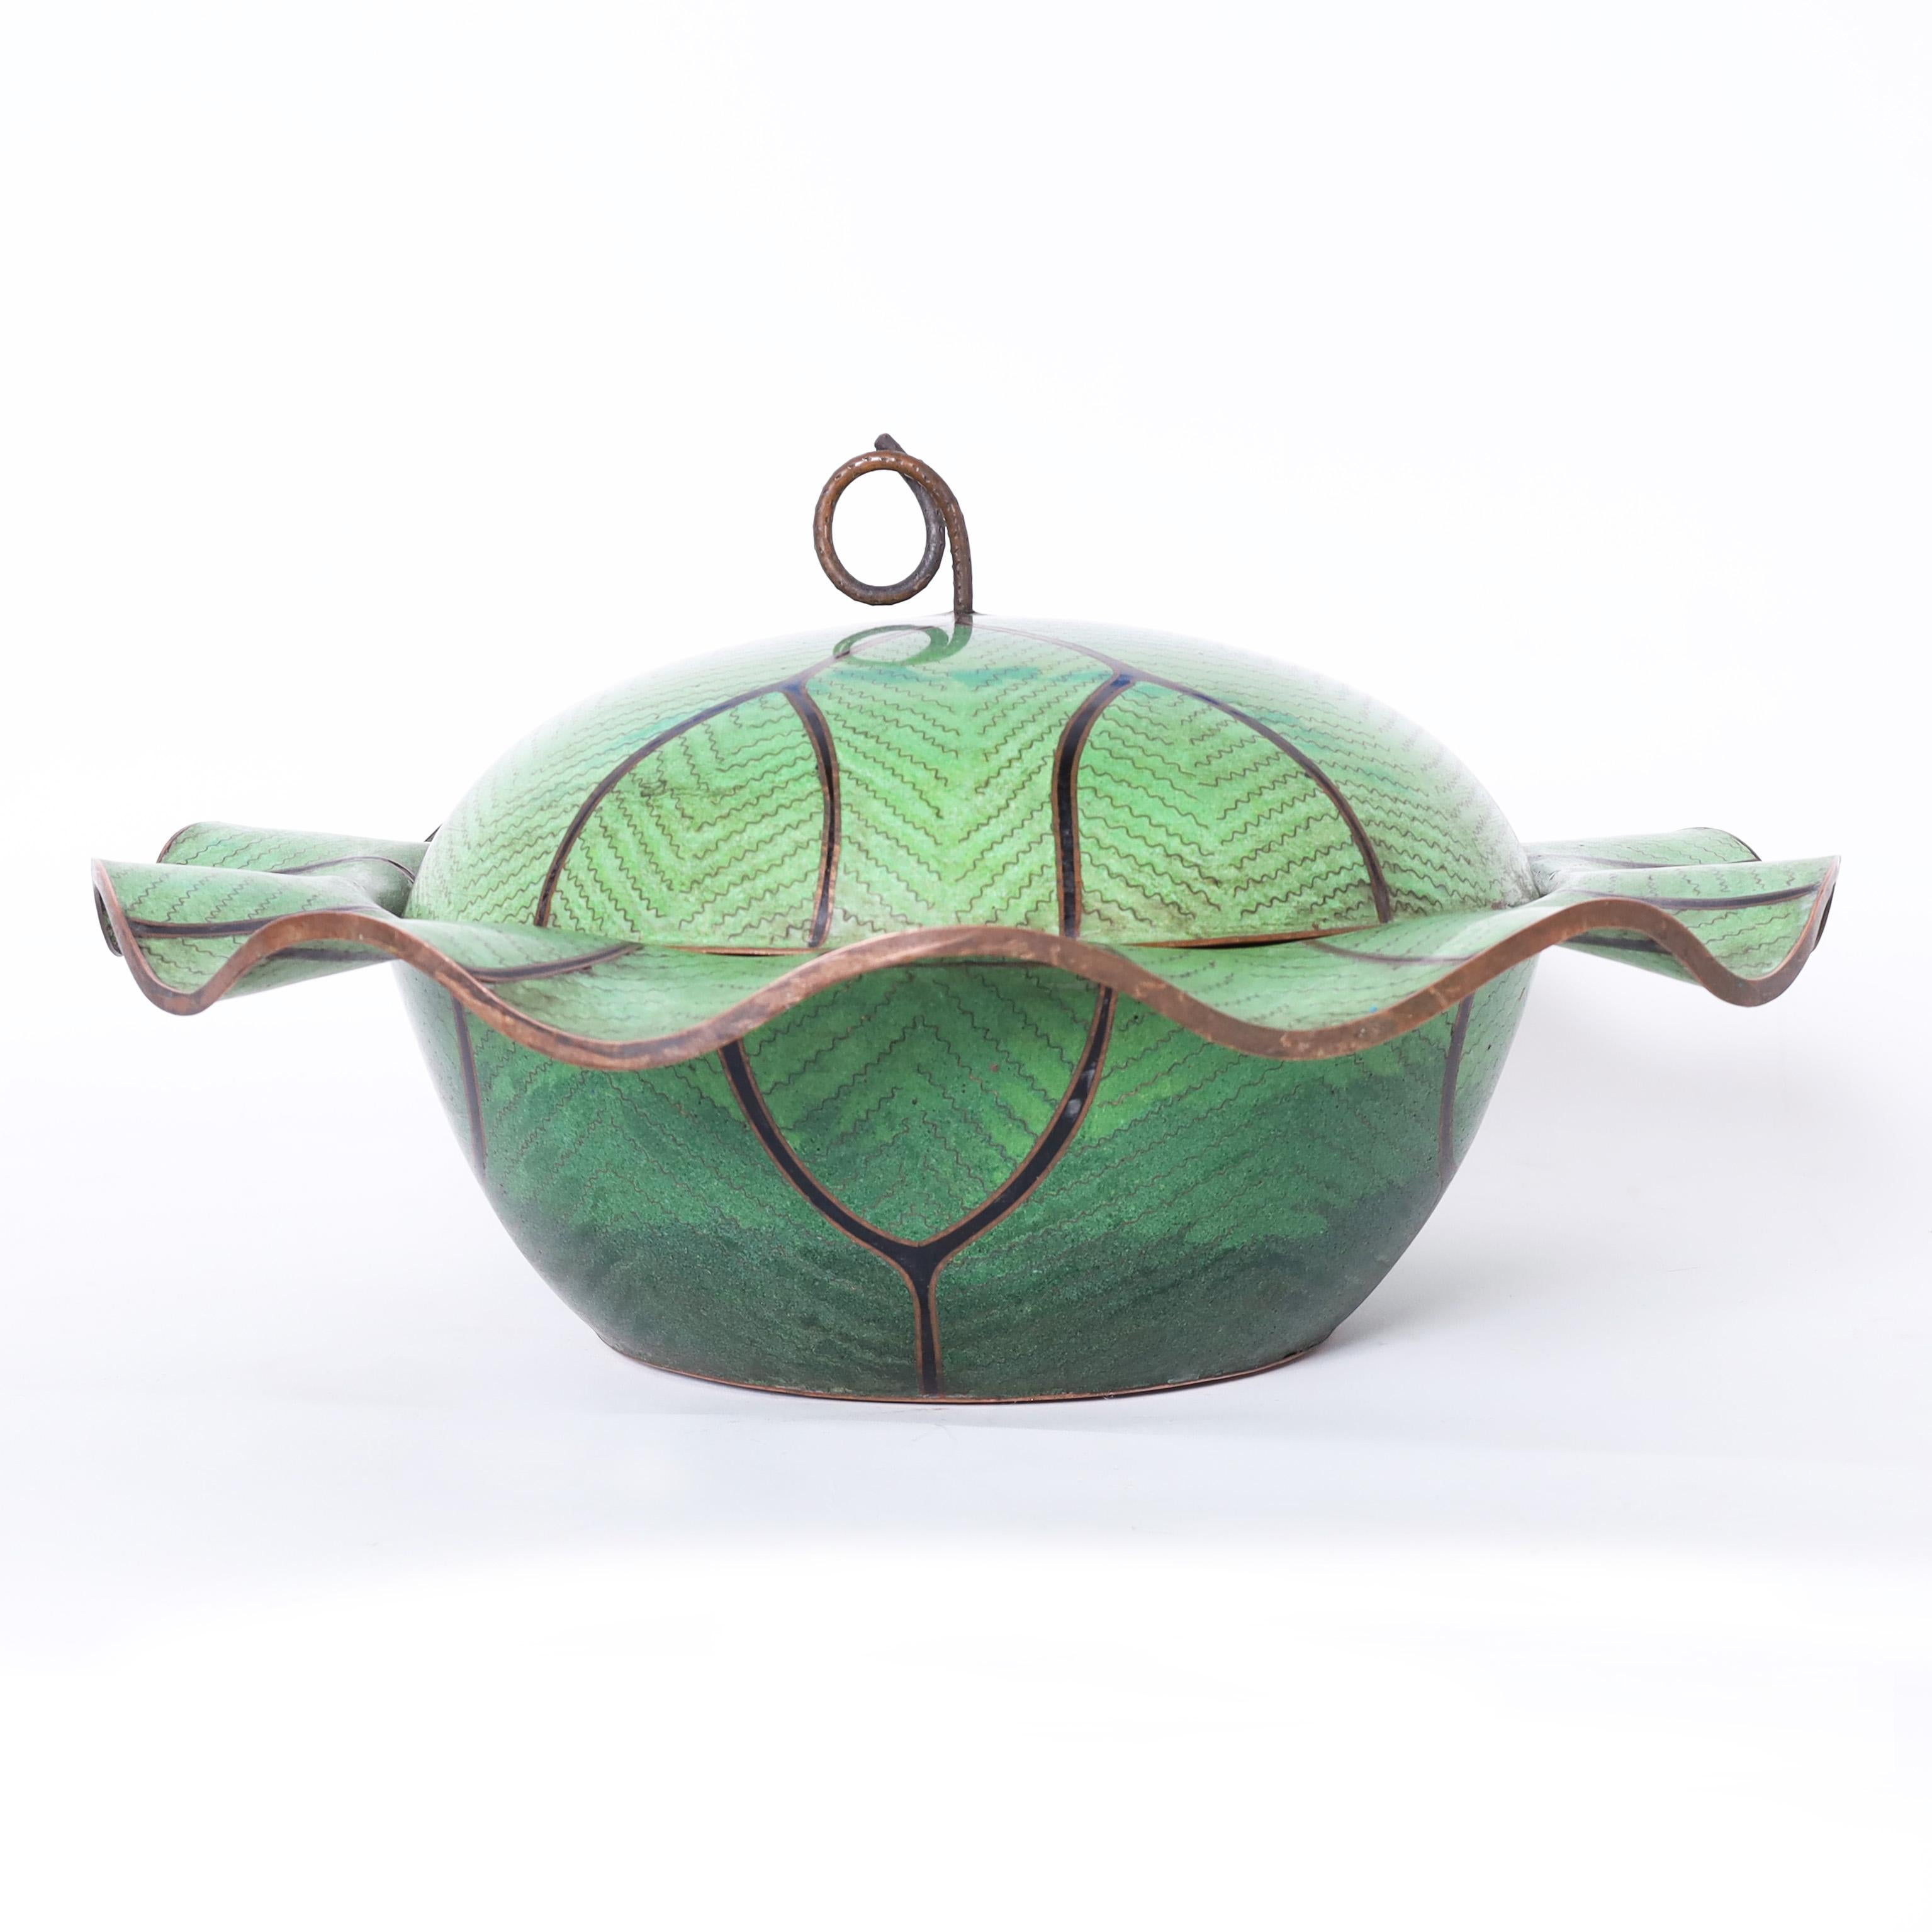 Standout Chinese lidded bowl crafted in copper and enamel or cloisonné in the leafy form of cabbage with a stem handle and blue interior.